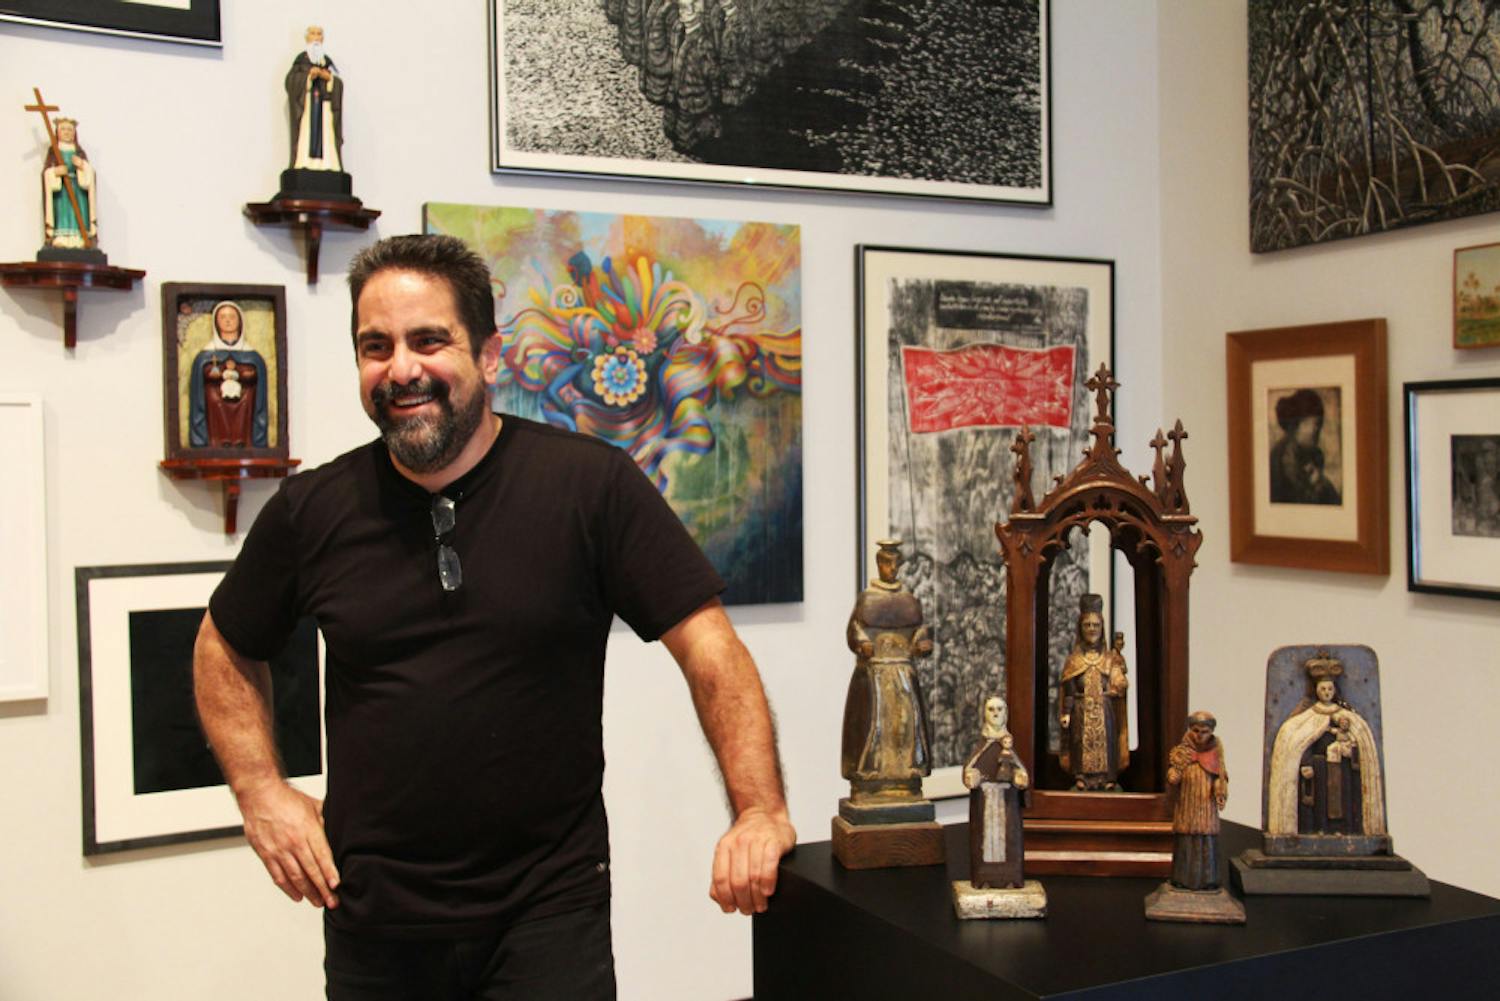 Hector Puig stands with some of the pieces of his collection in the University Gallery.